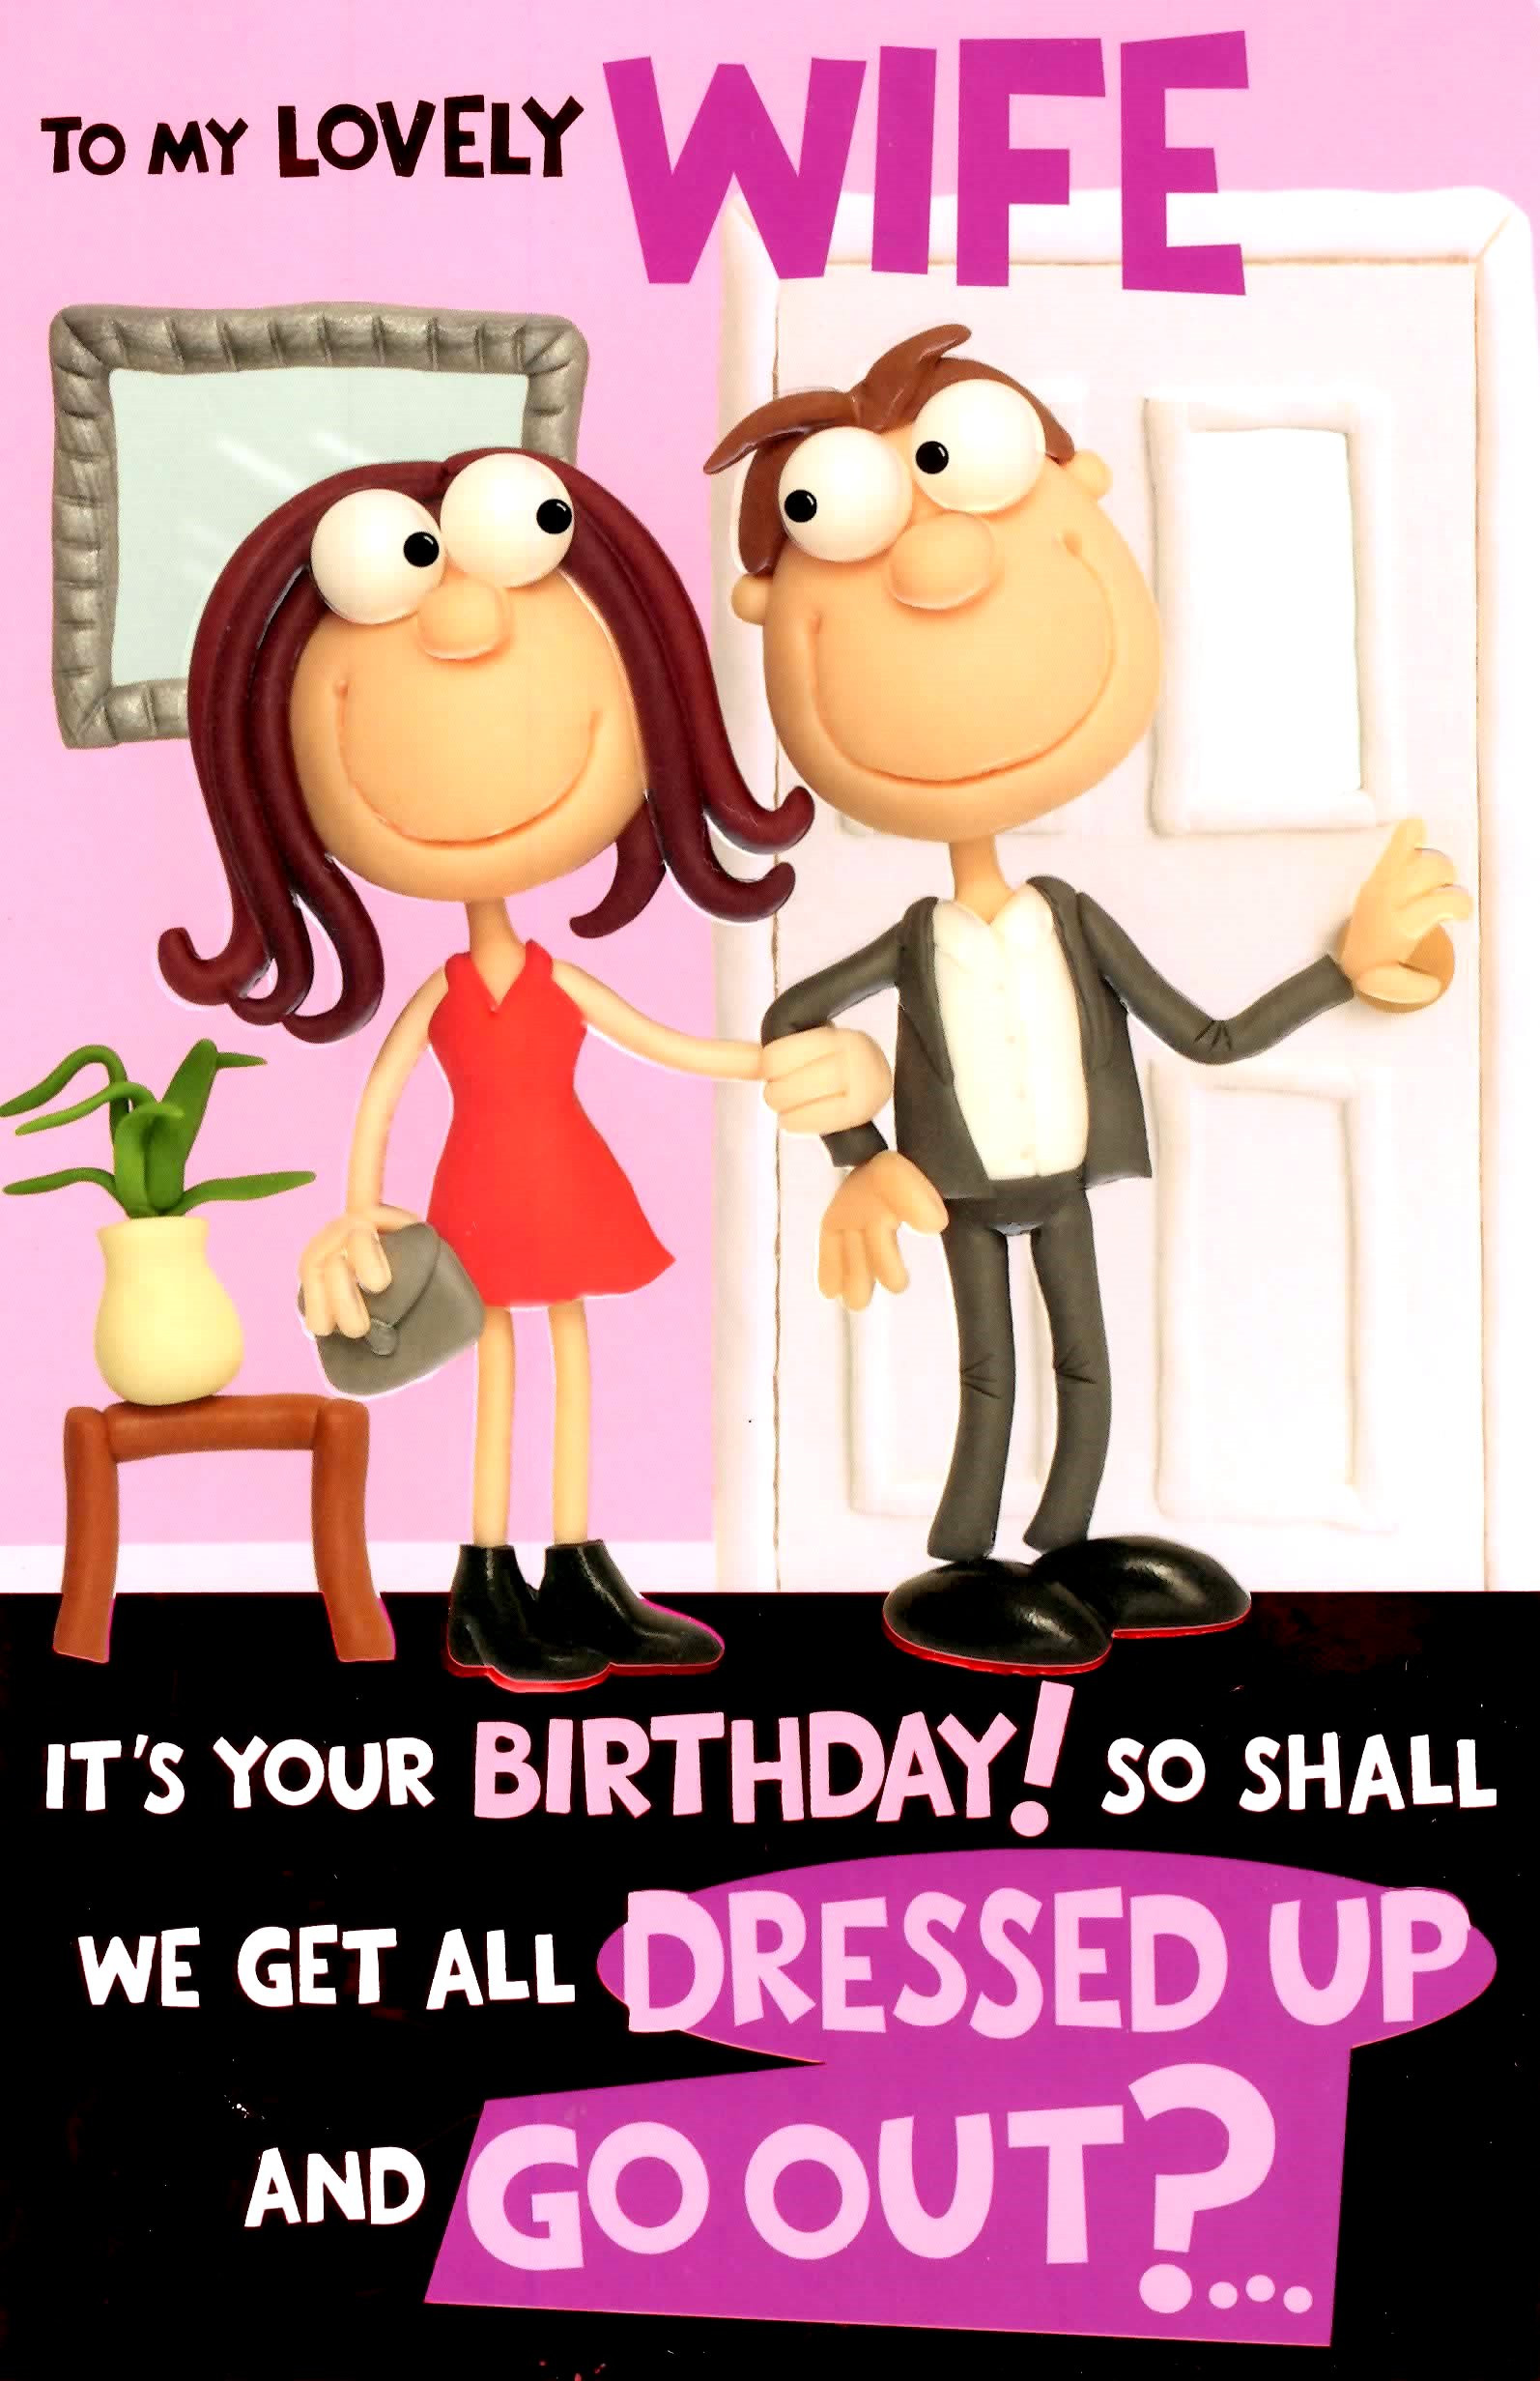 Free Printable Birthday Cards For Wife Funny